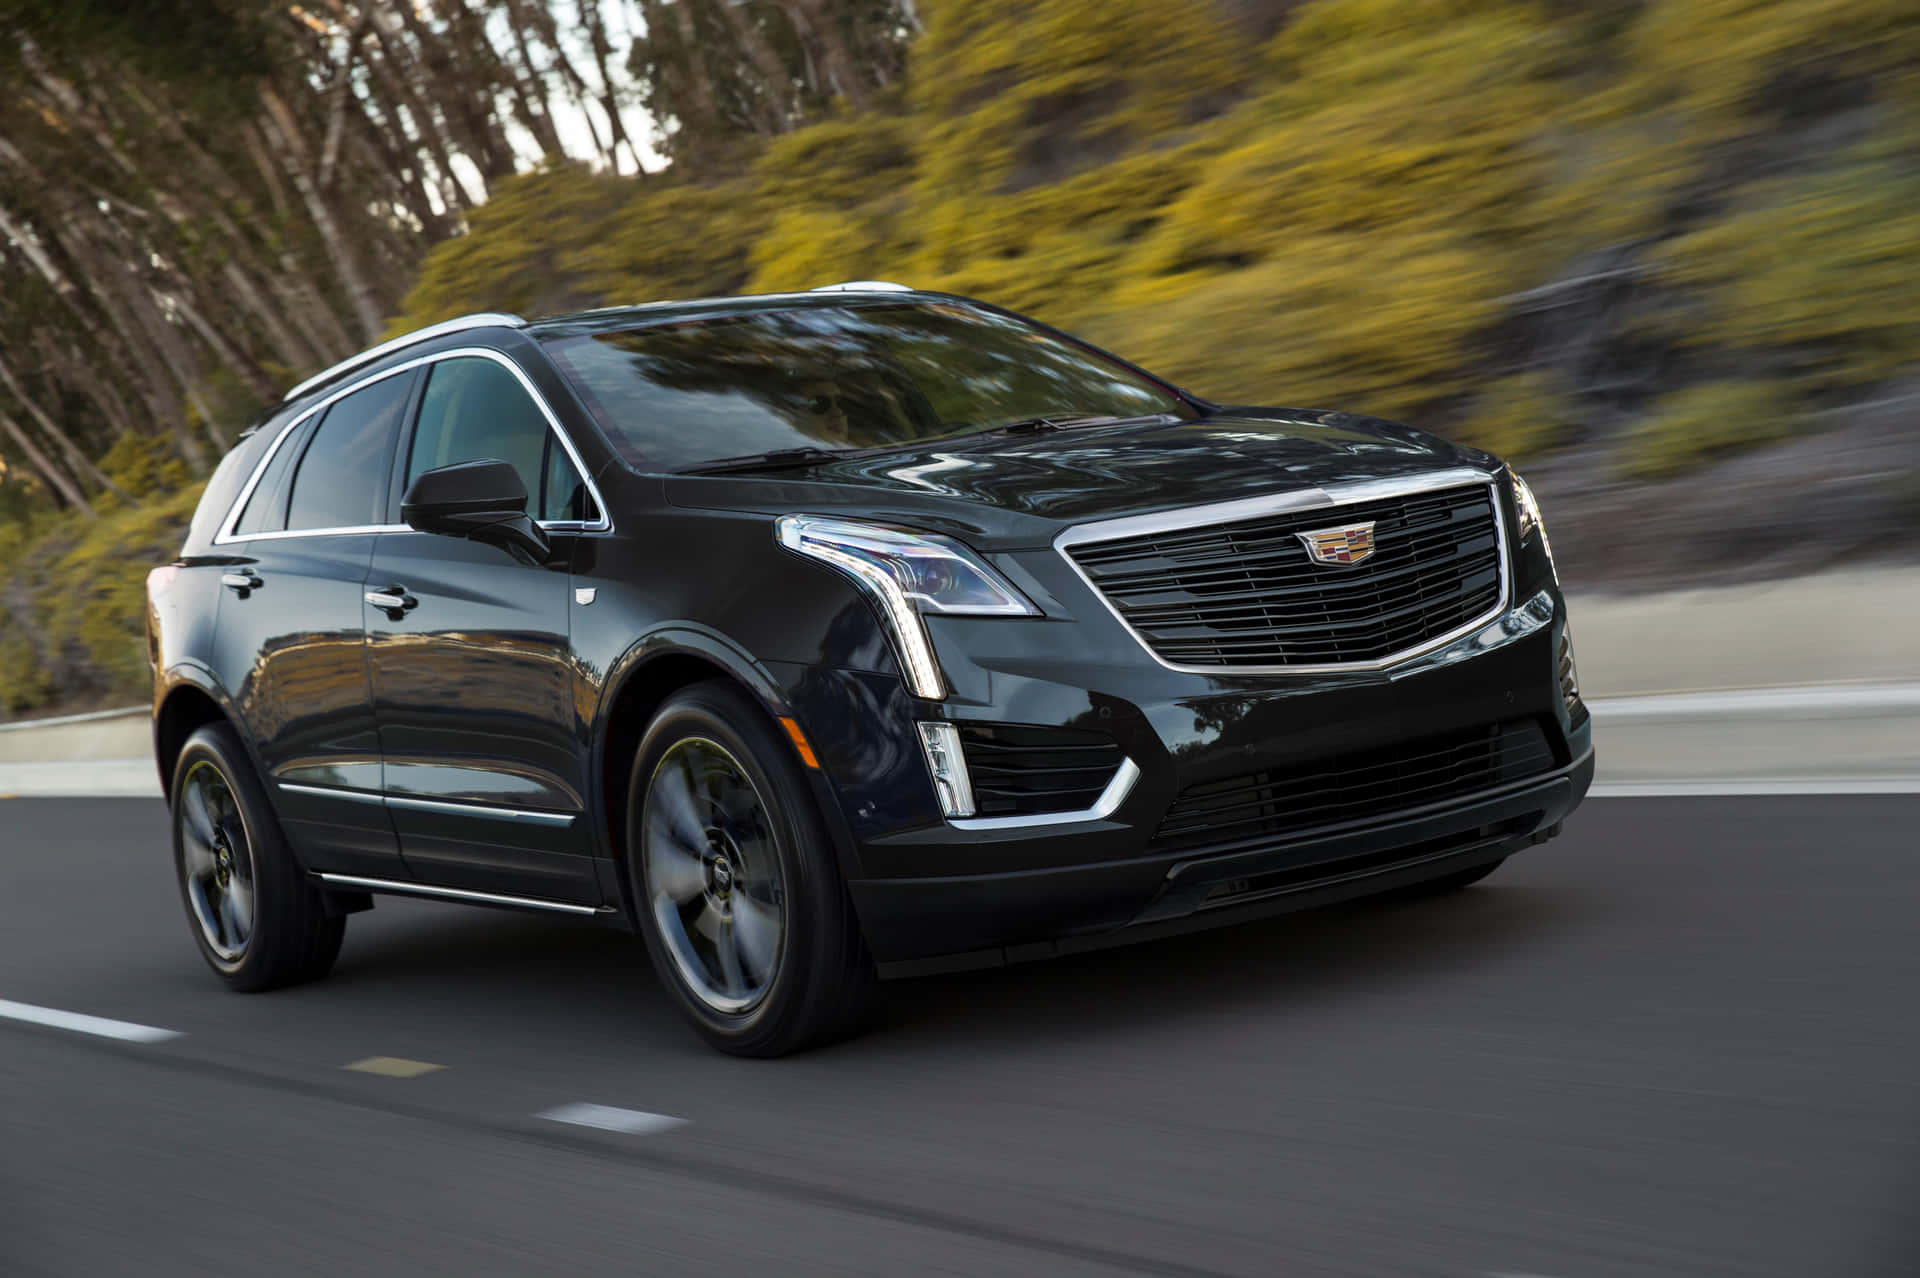 Sleek Cadillac XT5 in motion on the highway Wallpaper